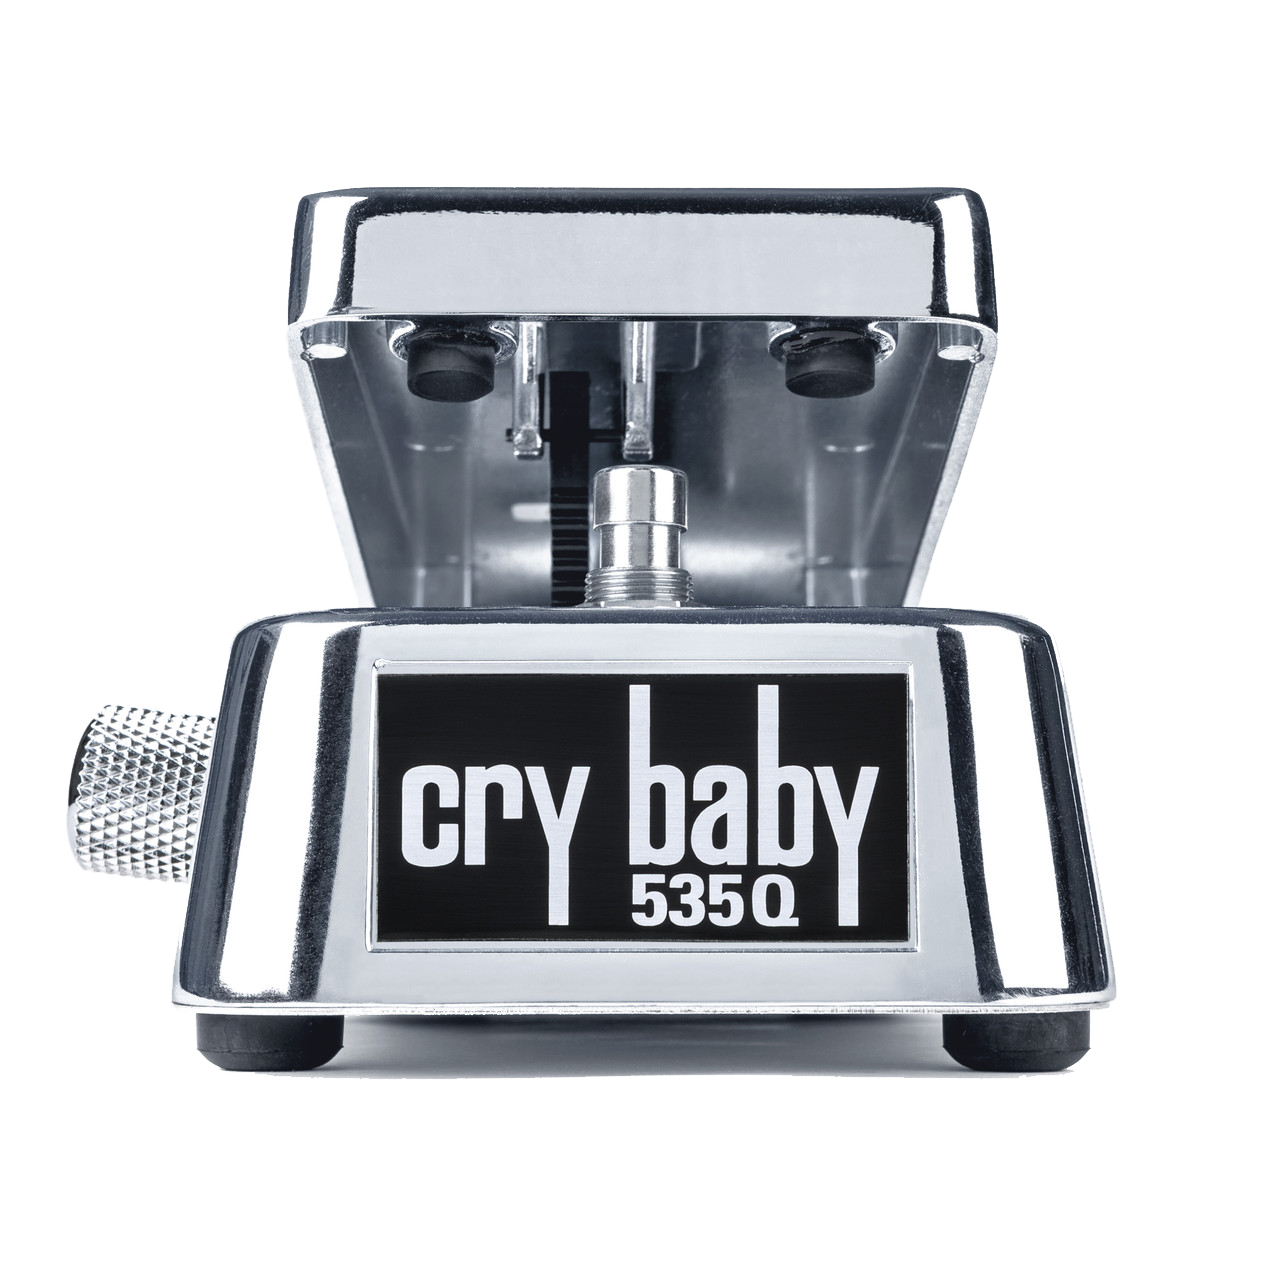 Front of Dunlop Cry Baby Q-Chrome 535Q-C.